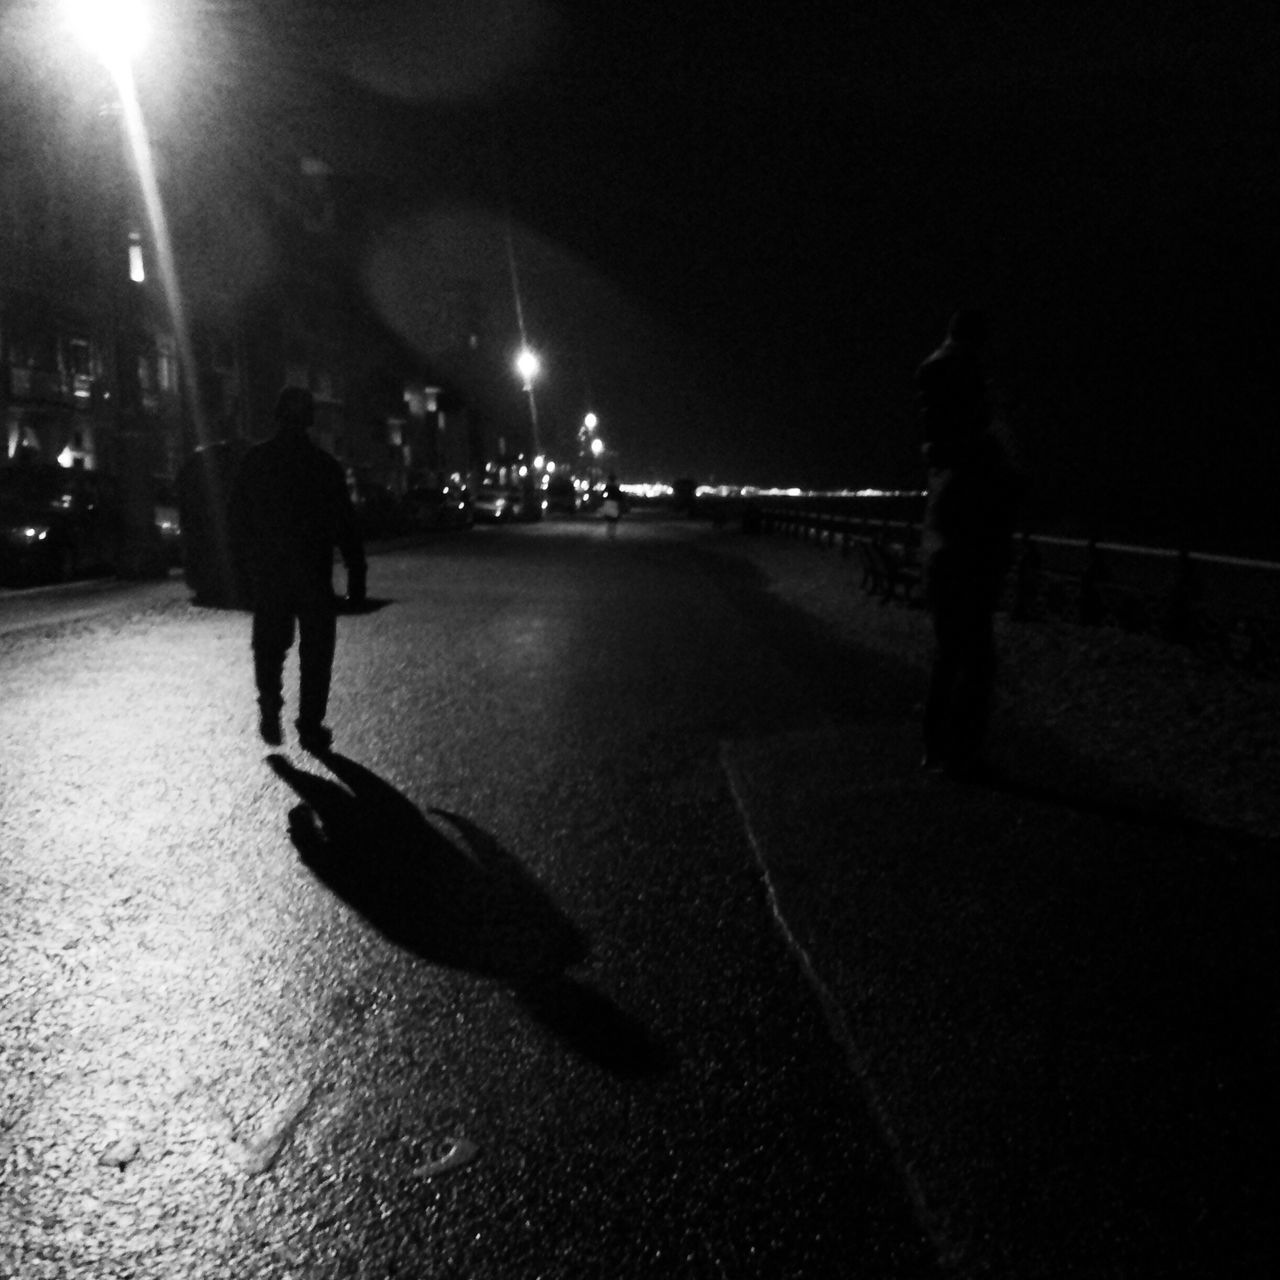 night, full length, illuminated, walking, lifestyles, street, men, leisure activity, rear view, road, city life, city, person, street light, on the move, the way forward, silhouette